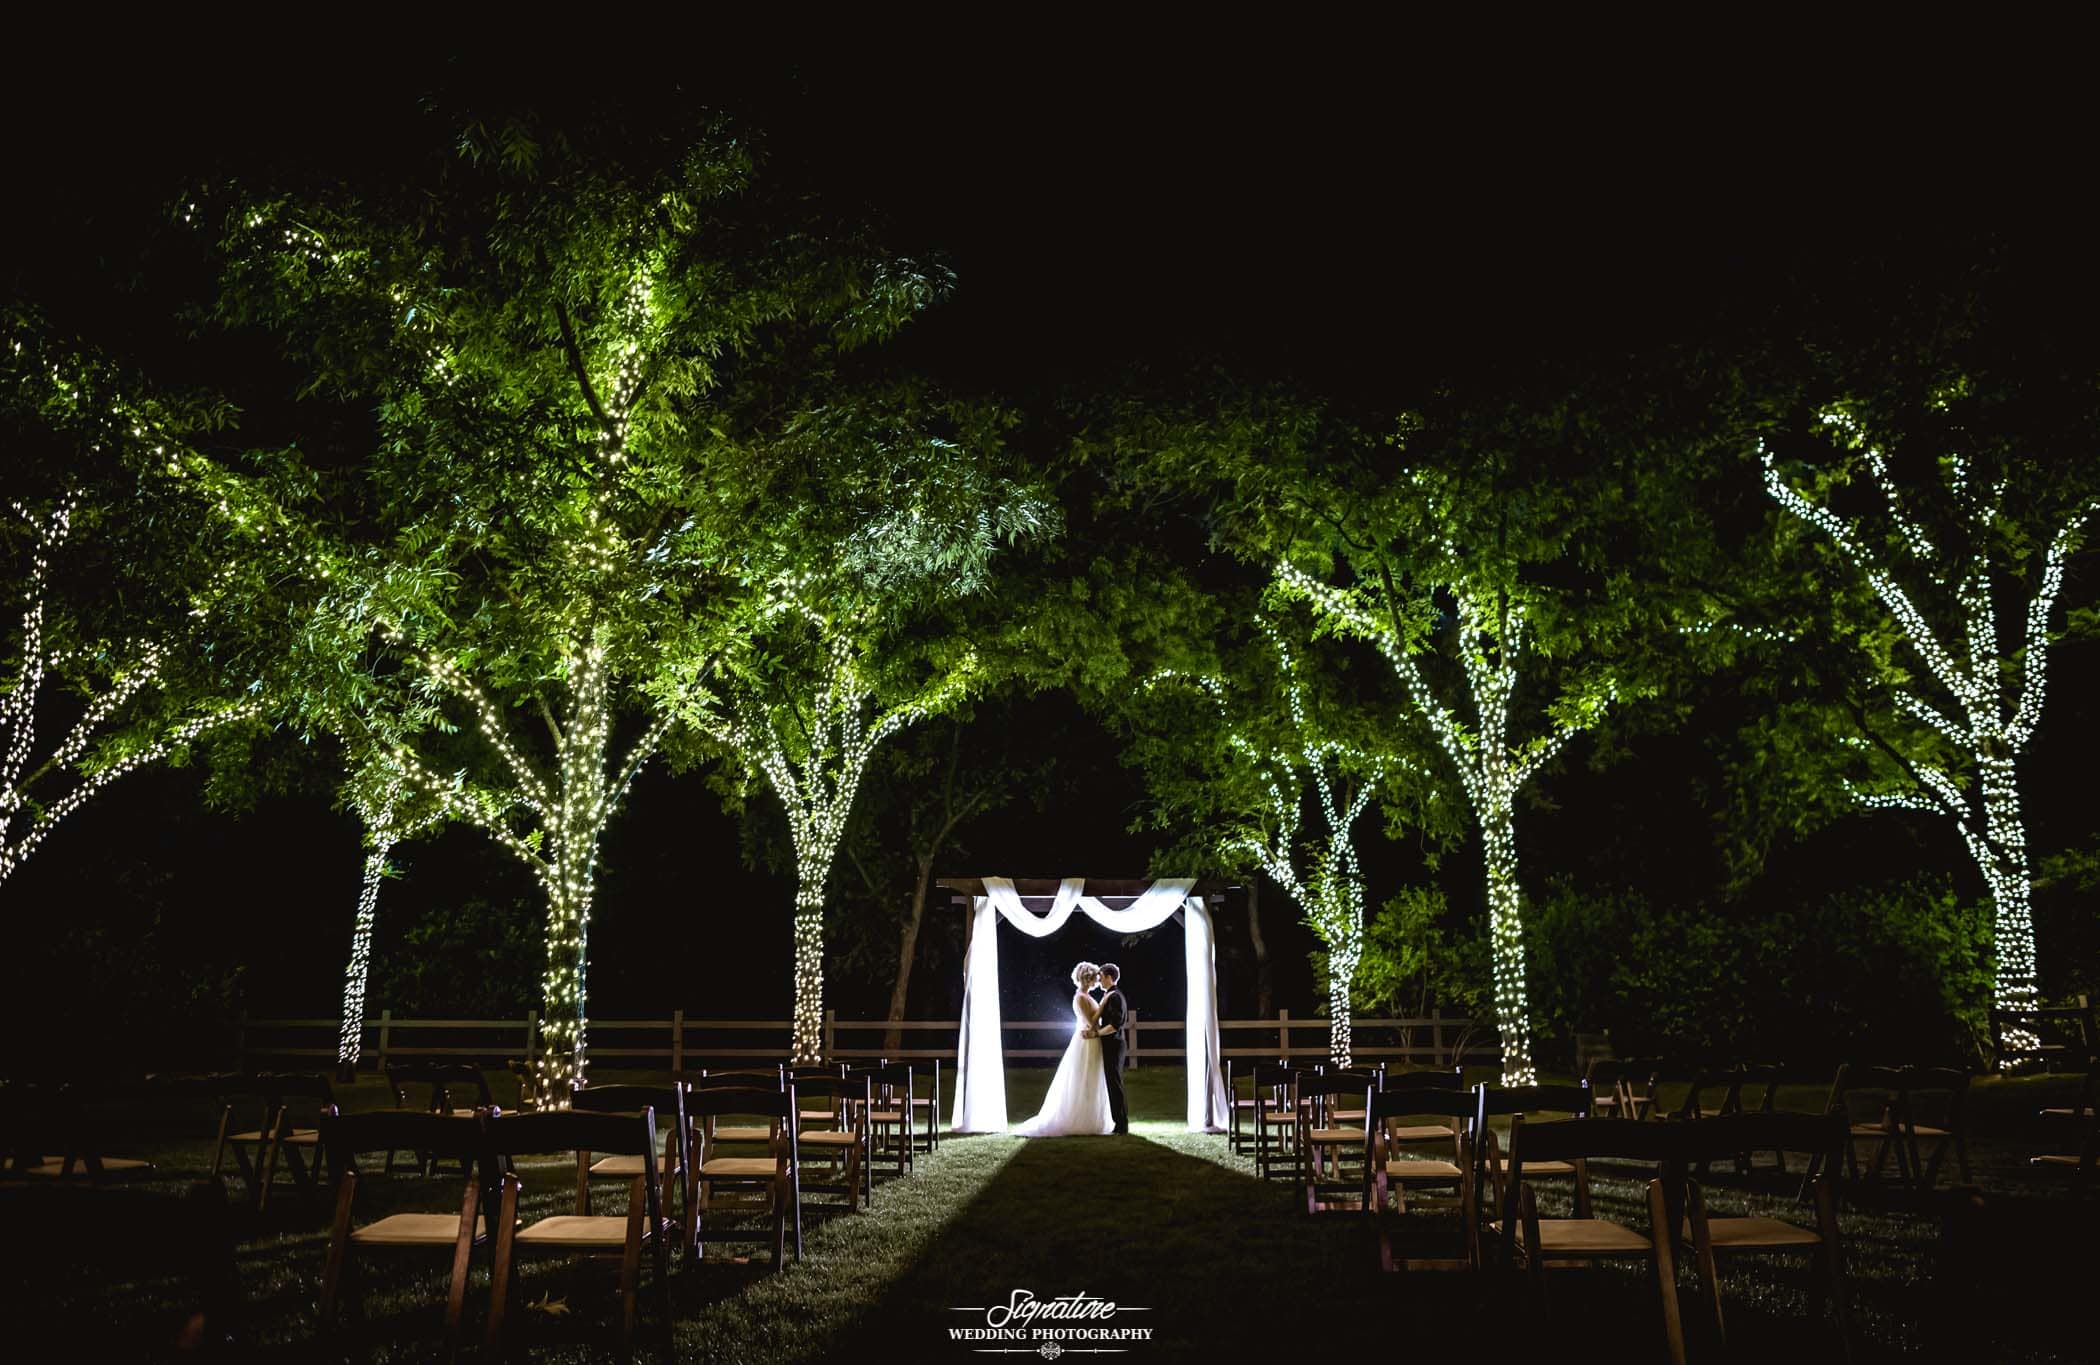 Bride and groom under archway with lit up trees